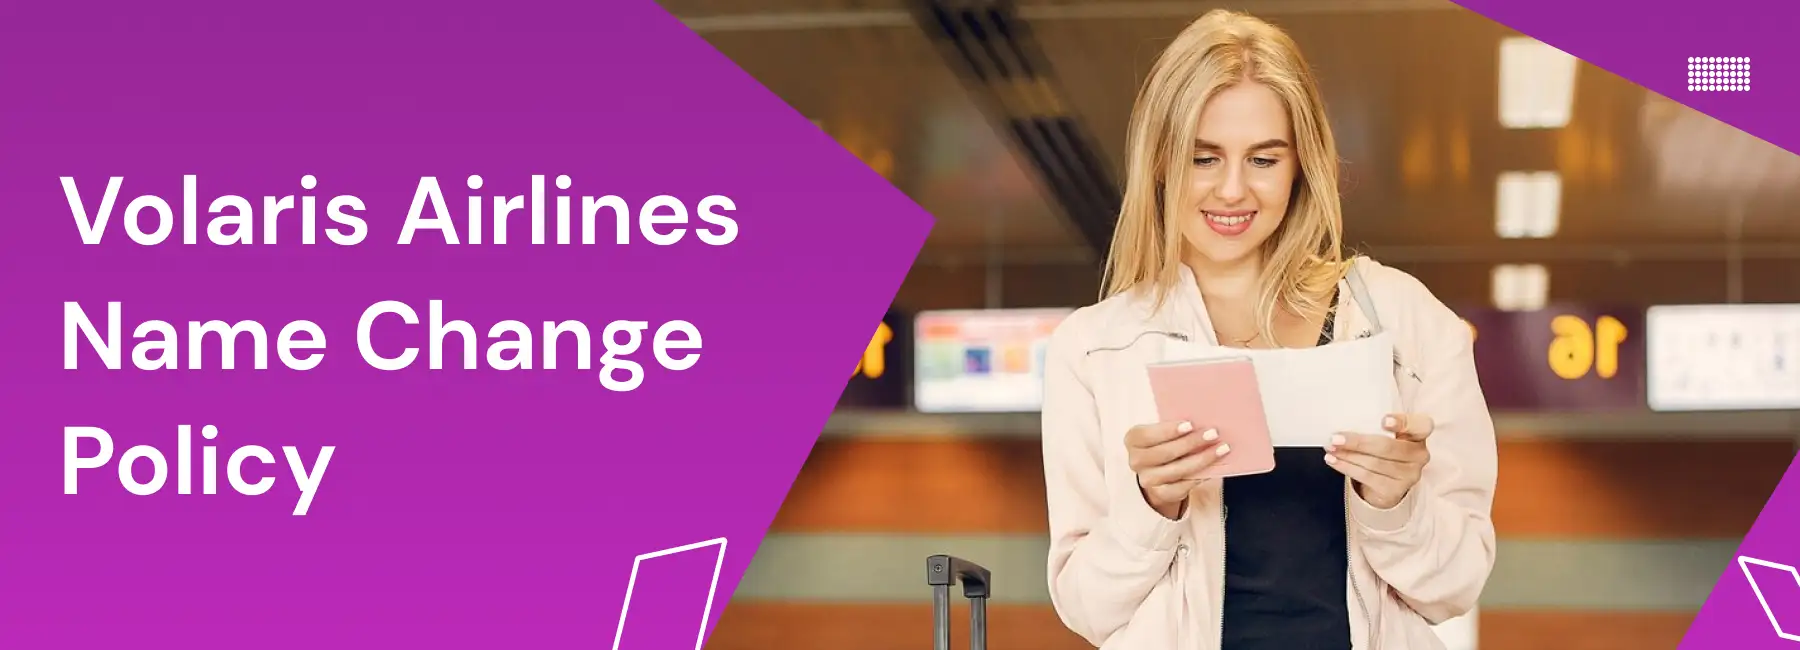 Volaris Airlines Name Change Policy